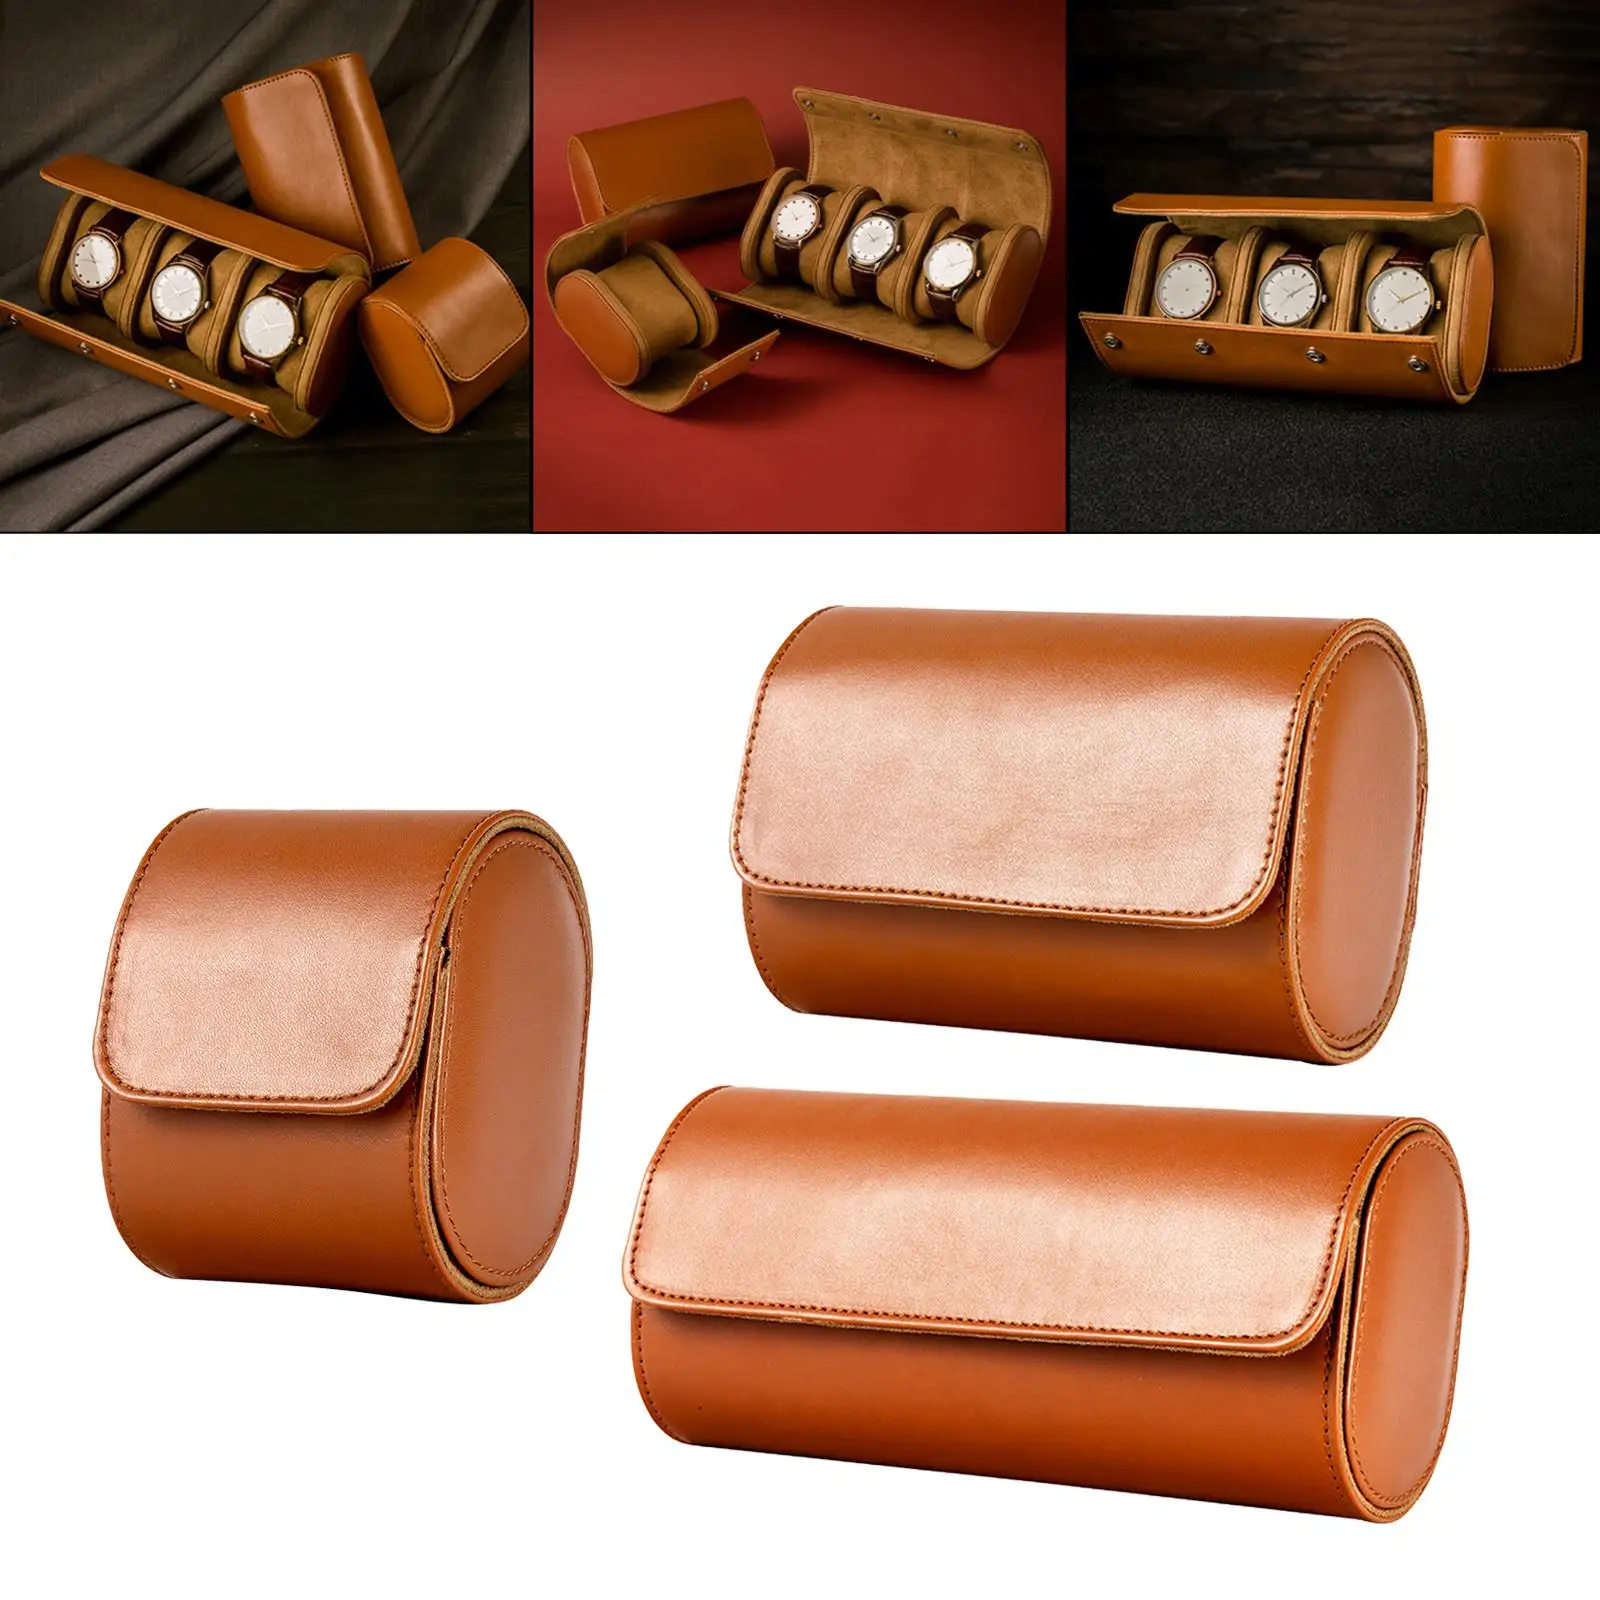 PU Leather Watch Box Organizer with Removable - Jewelry Display & Storage Container Holder